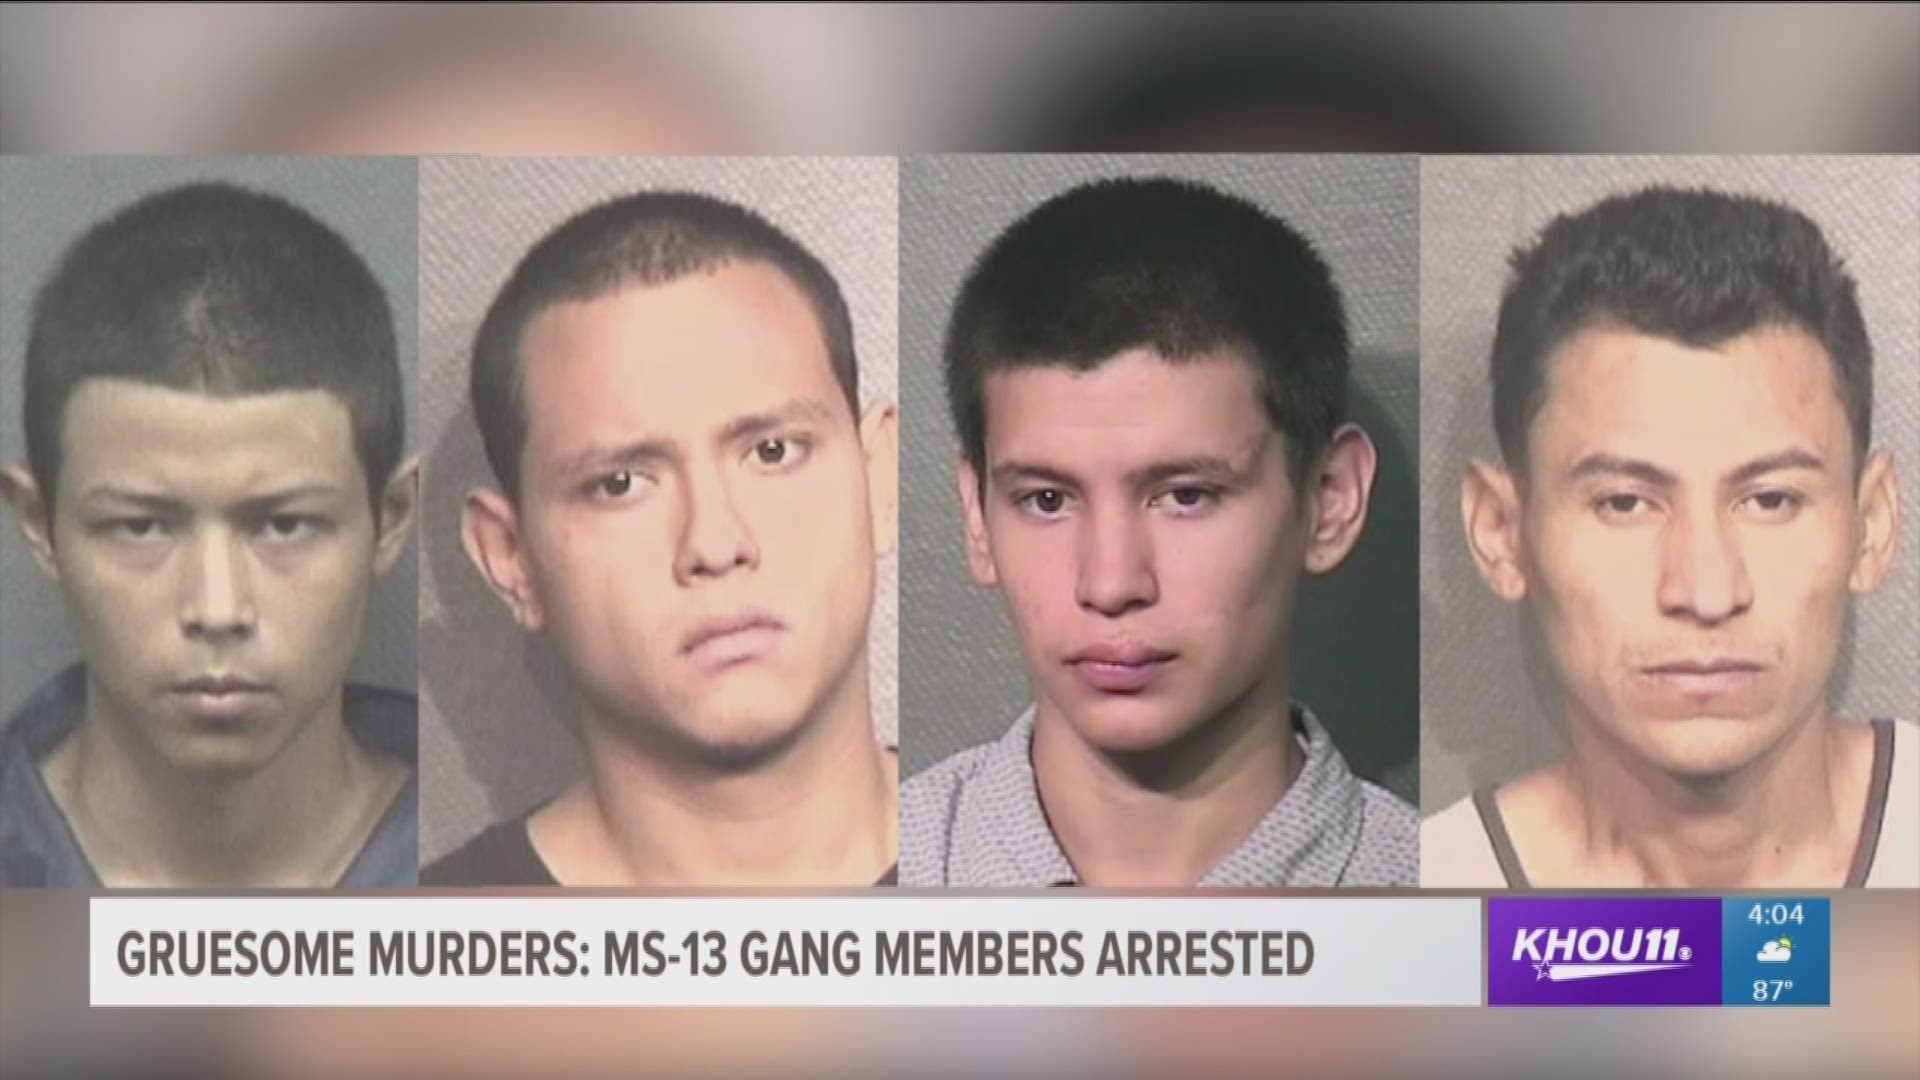 Nine alleged MS-13 gang members have been arrested and charged in connection with several murder cases in Houston, Galveston and Liberty County.